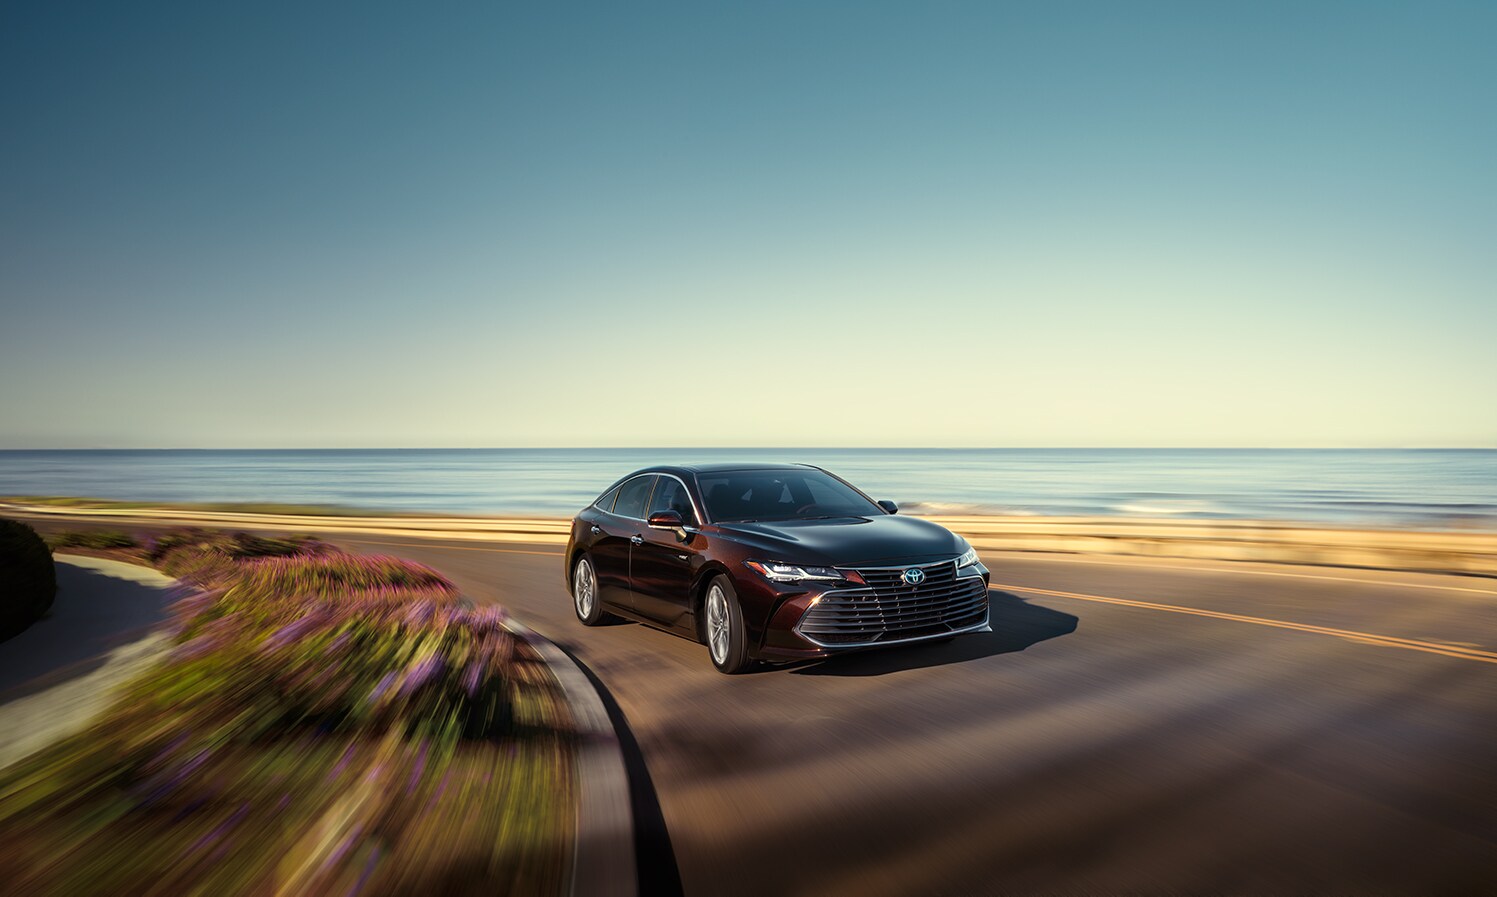 Toyota Hybrid for Everyone at Bobby Rahal Toyota | 2022 Toyota Avalon Hybrid driving on a road along the coast